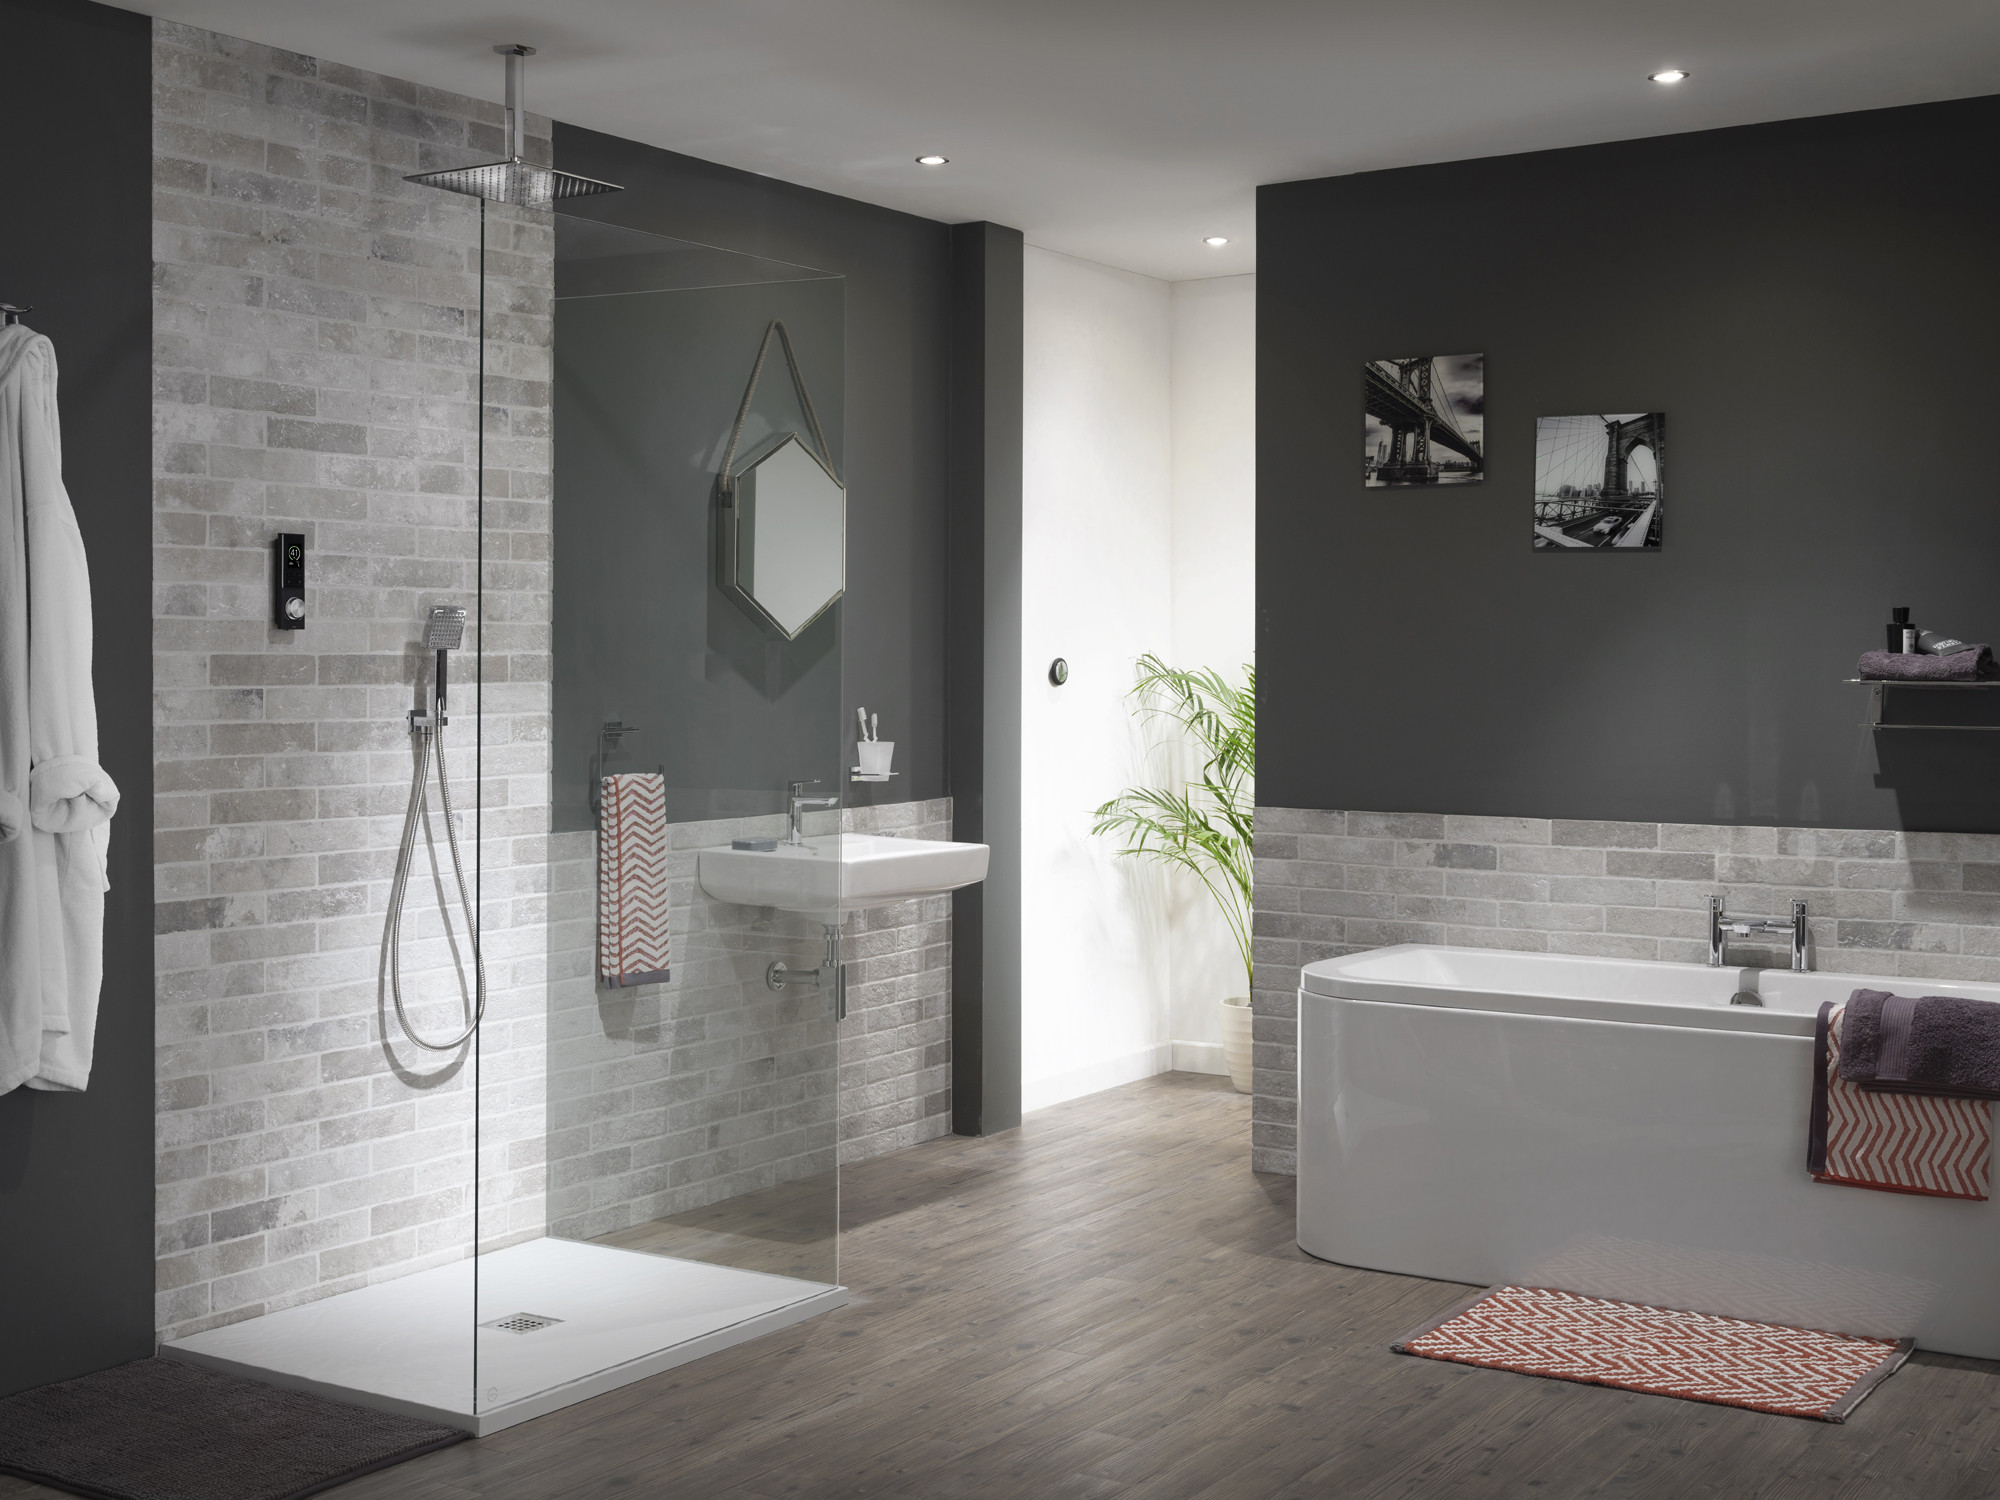 Latest Bathroom Designs
 Using the latest shower trends to create stand out bathrooms